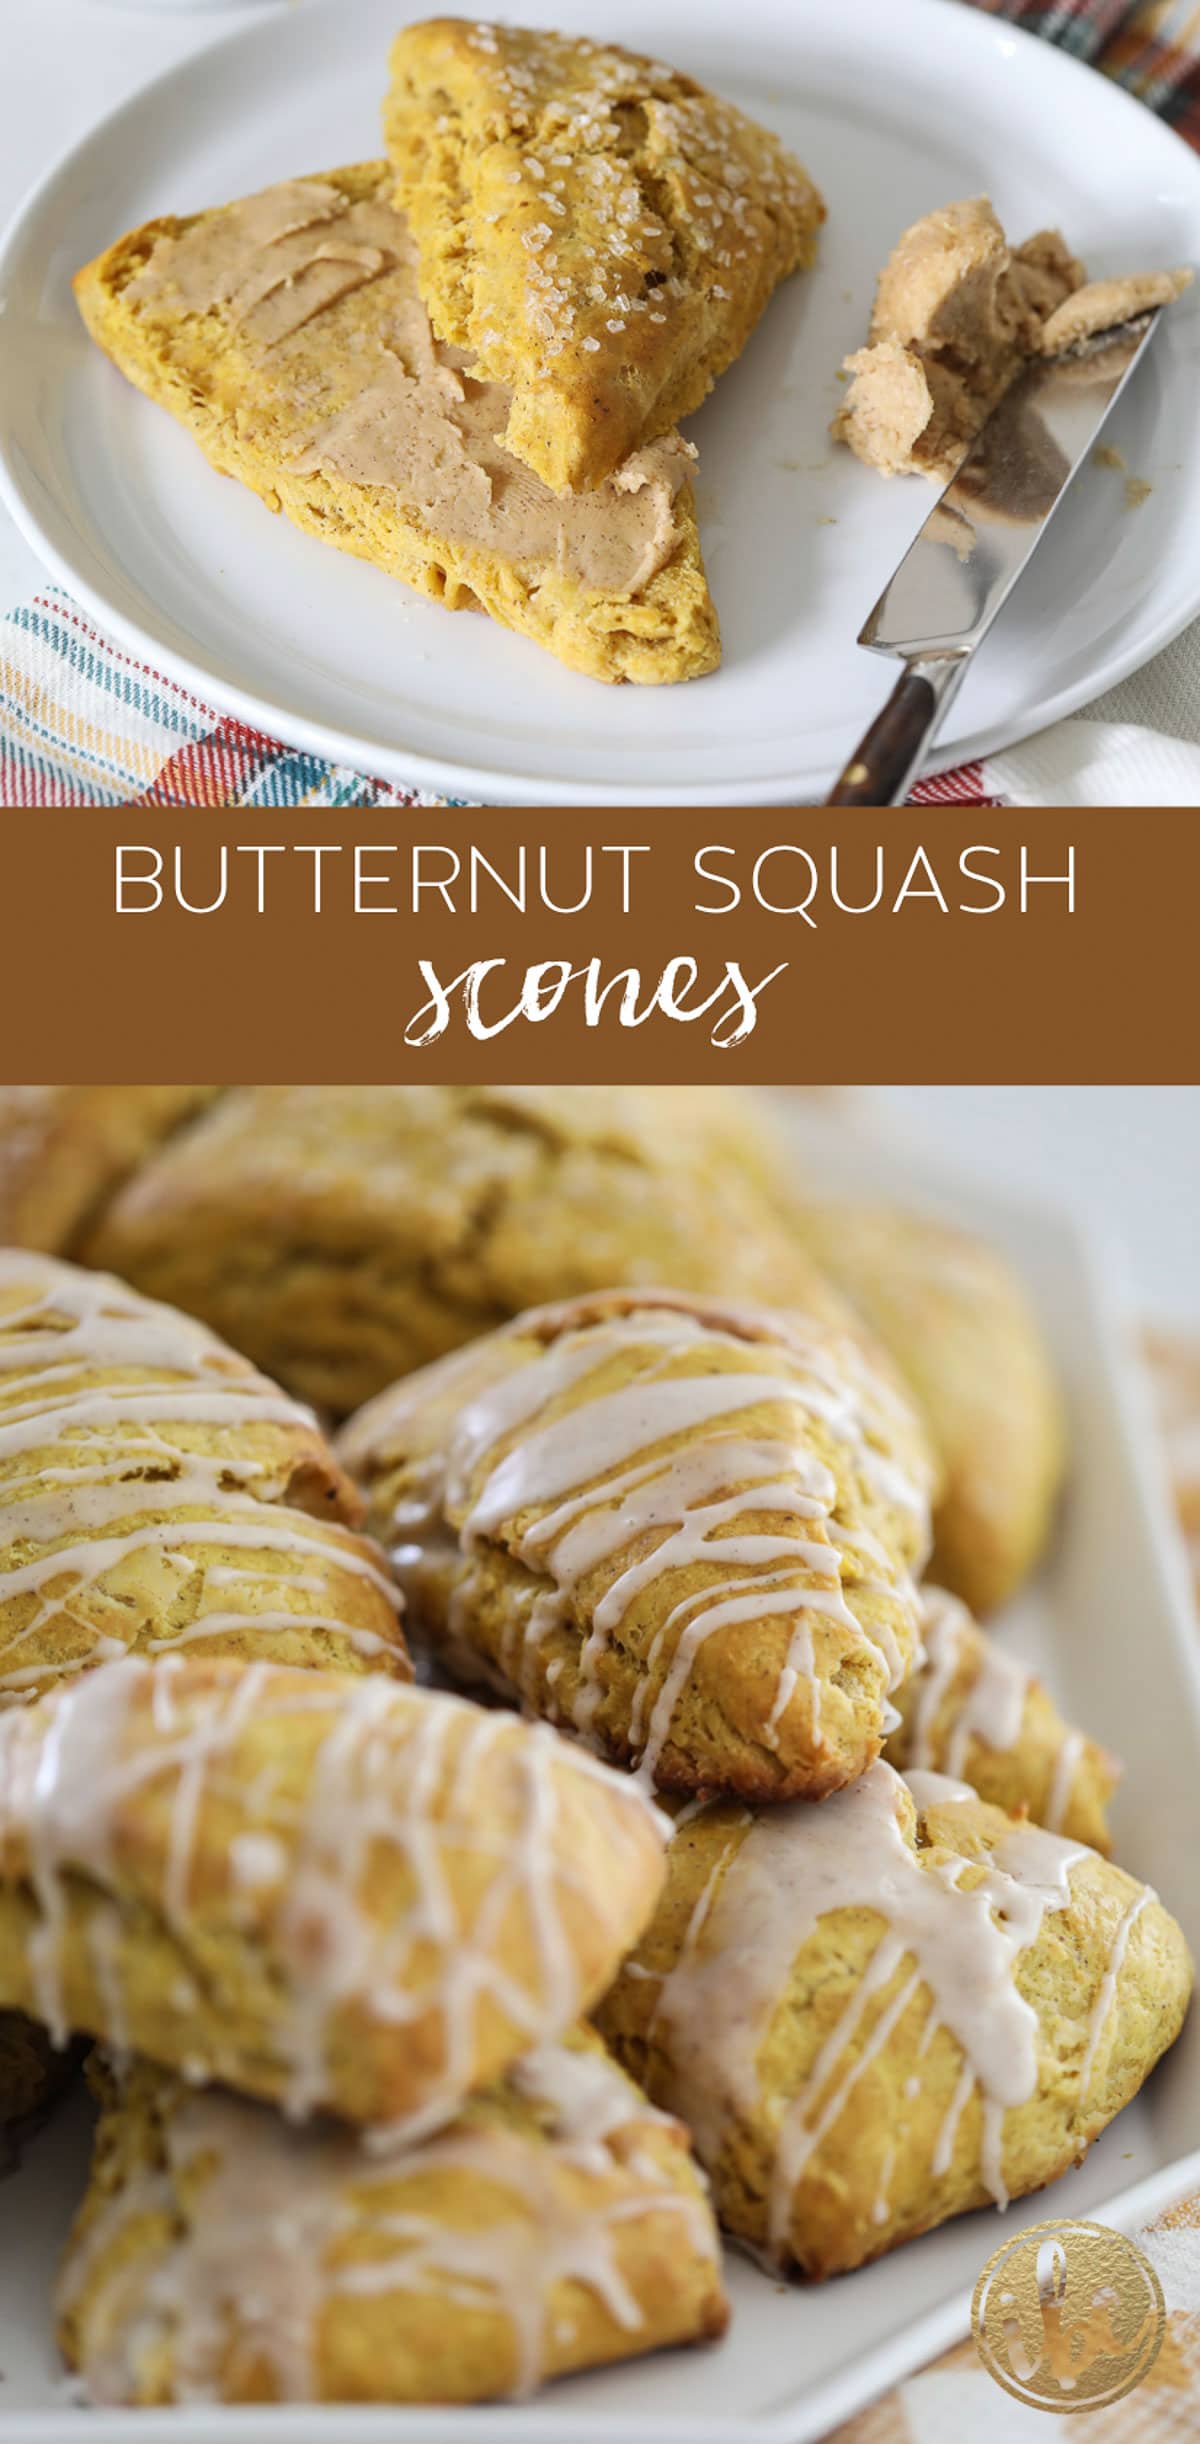 These Butternut Squash Scones are a delicious fall breakfast or fall dessert treat. #butternut #squash #scones #dessert #recipe #fallbaking